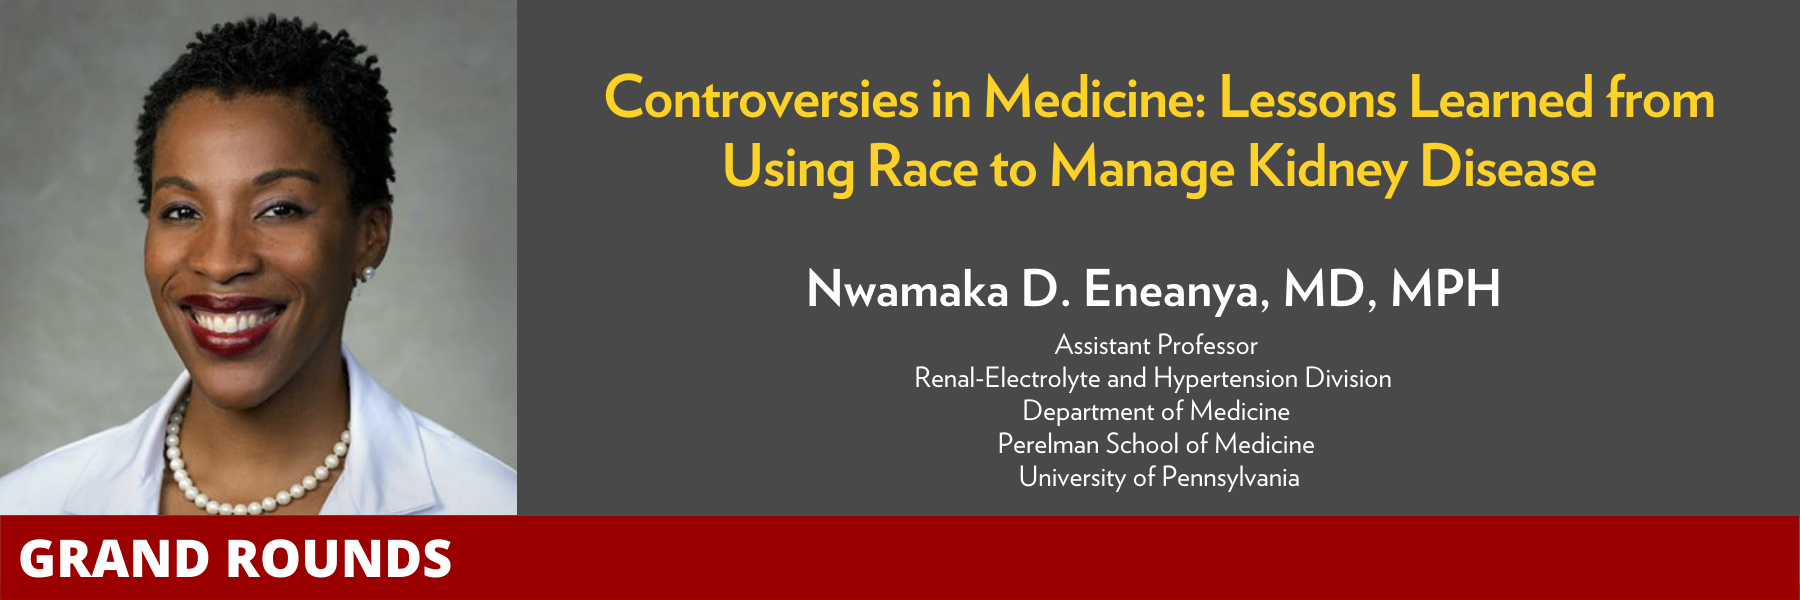 Nwamaka Eneanya, MD, MPH - Controversies in Medicine: Lessons Learned from Using Race to Manage Kidney Disease